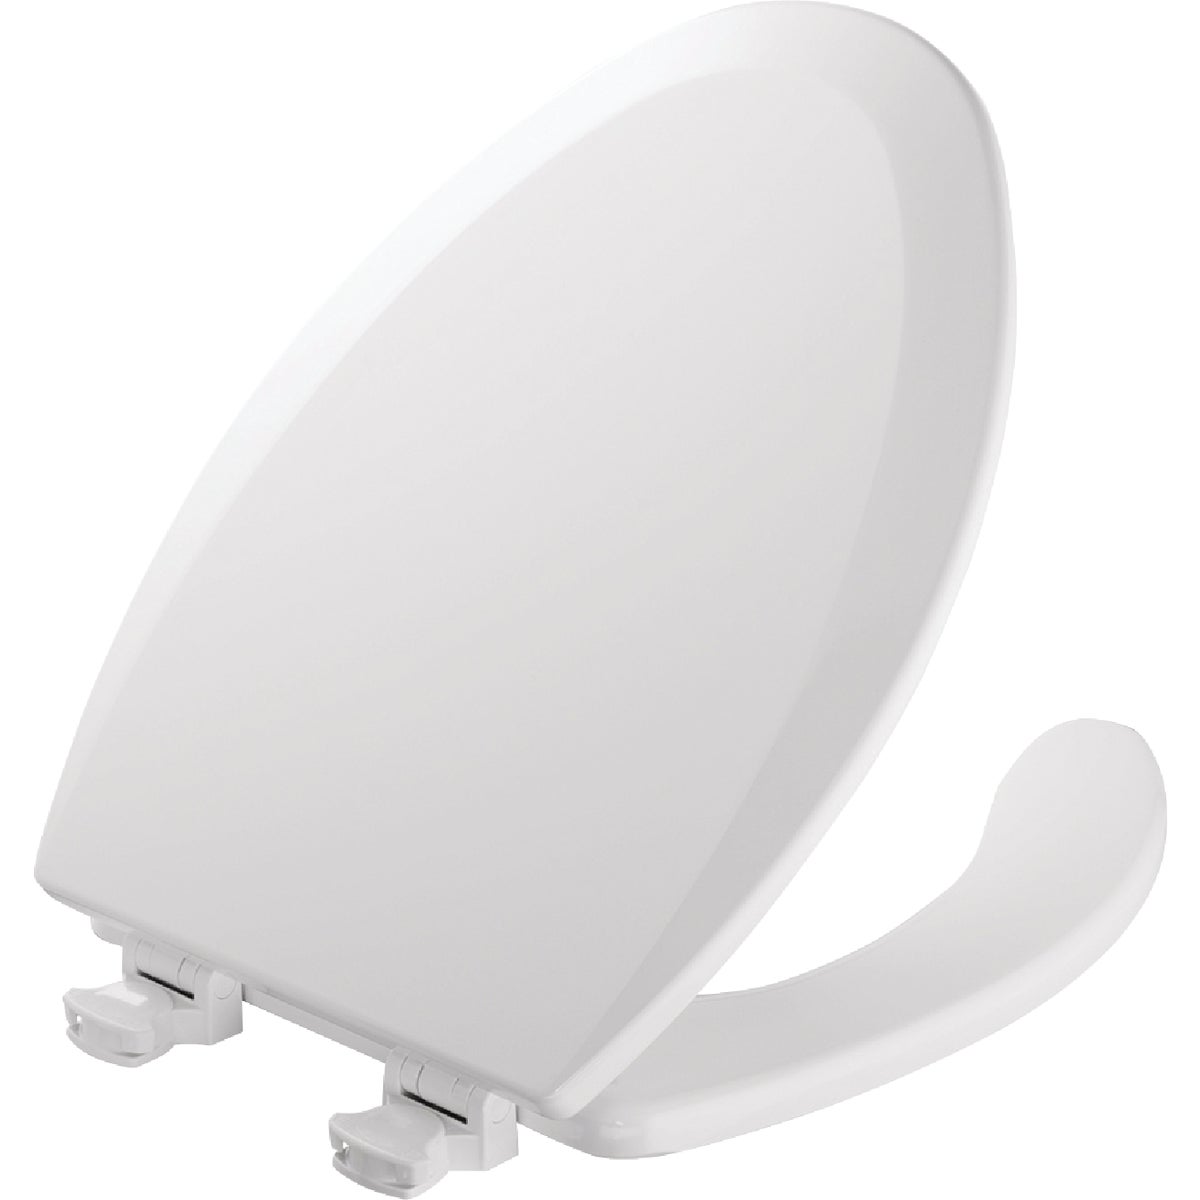 Mayfair Commercial Elongated Open Front White Toilet Seat with Cover